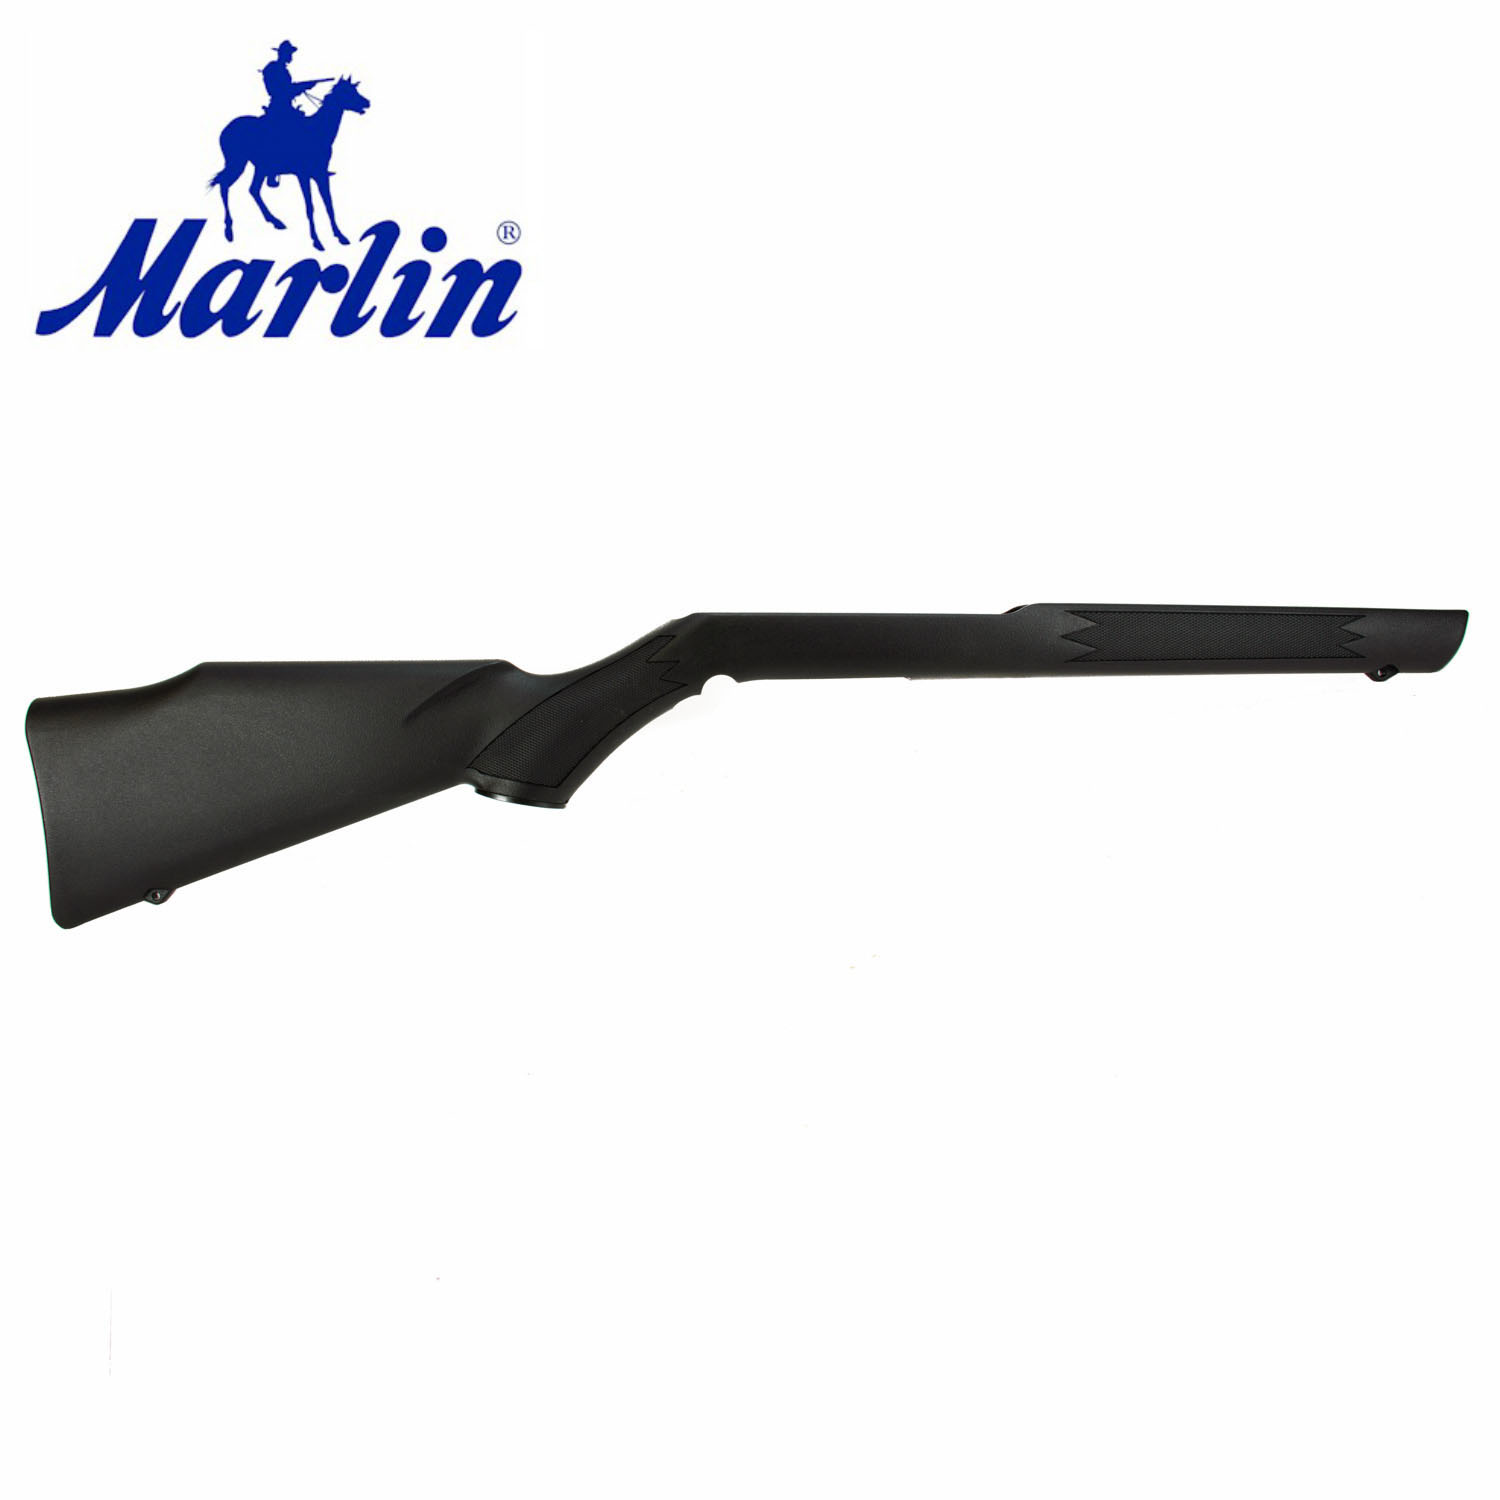 I'm looking for a Marlin Model 60 rifle (tube feed 22) synthetic stock...